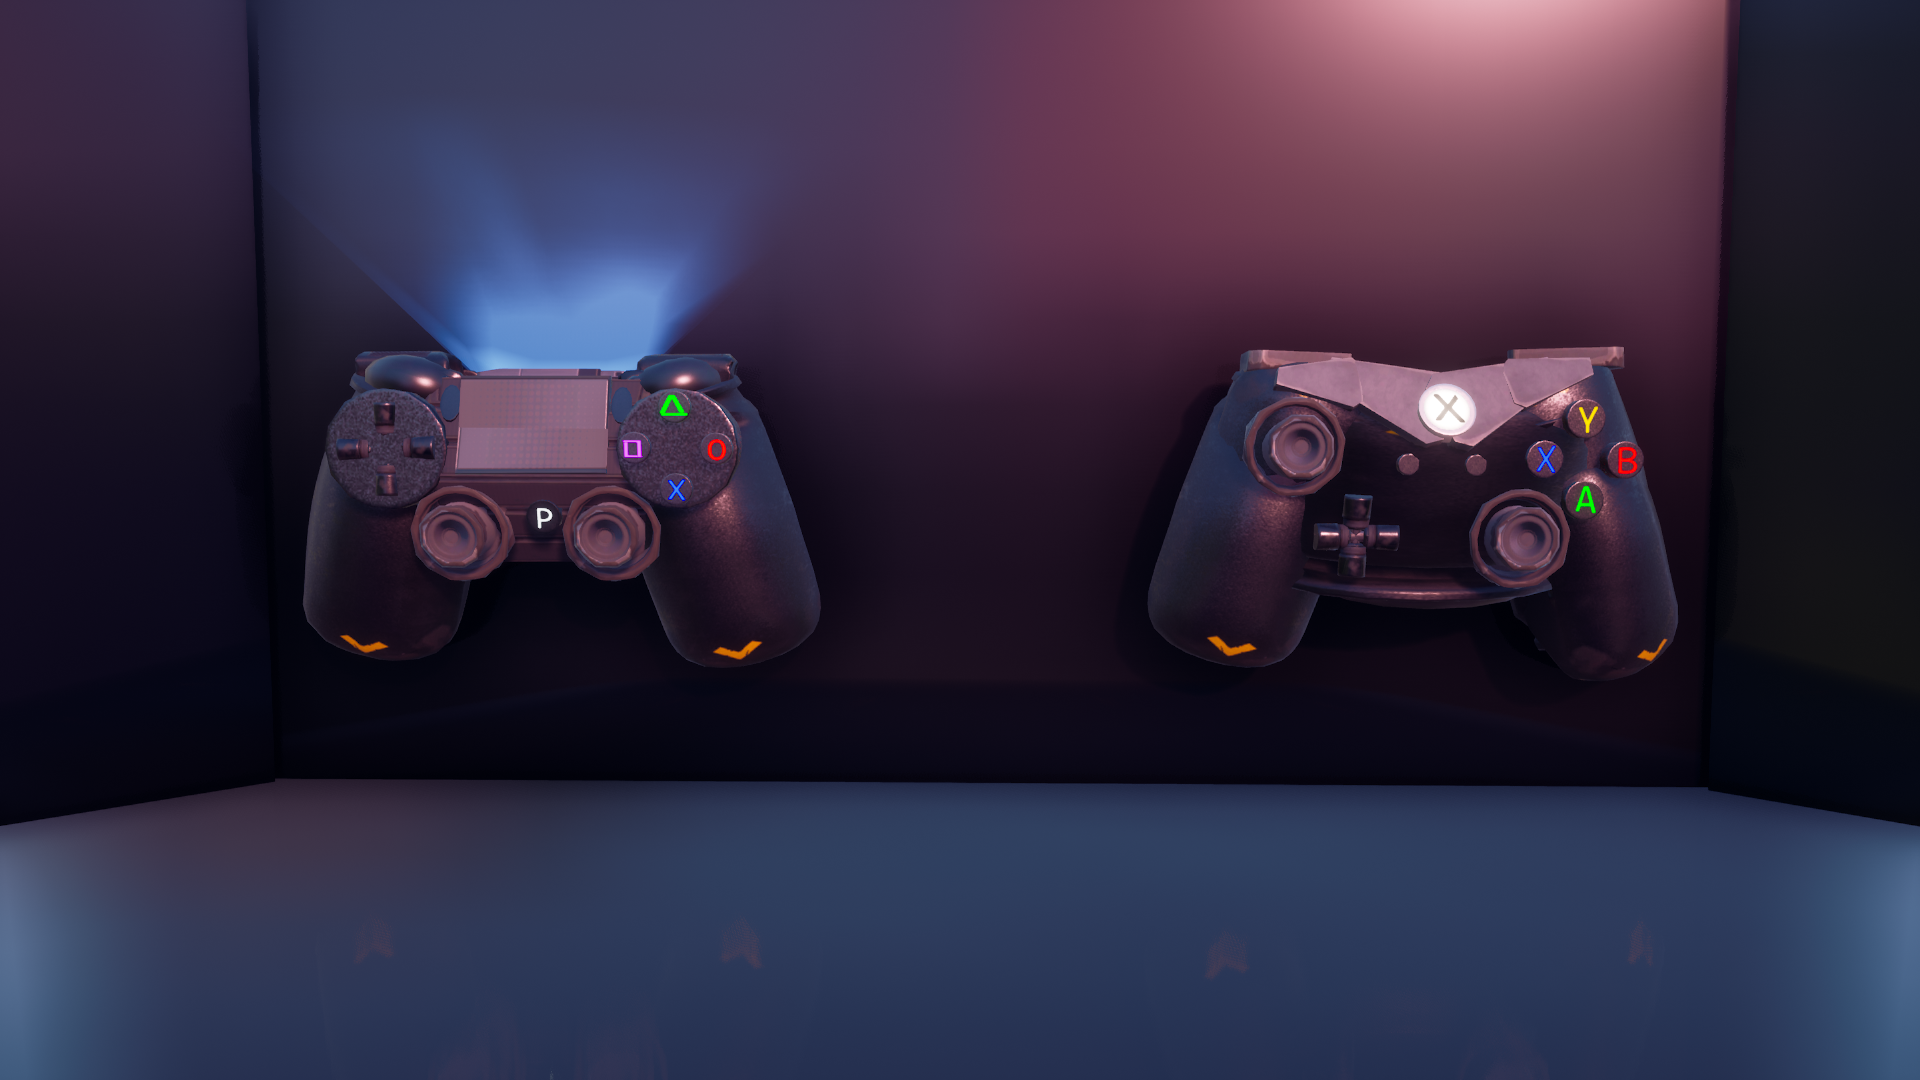 I built a PS4 and an Xbox controller